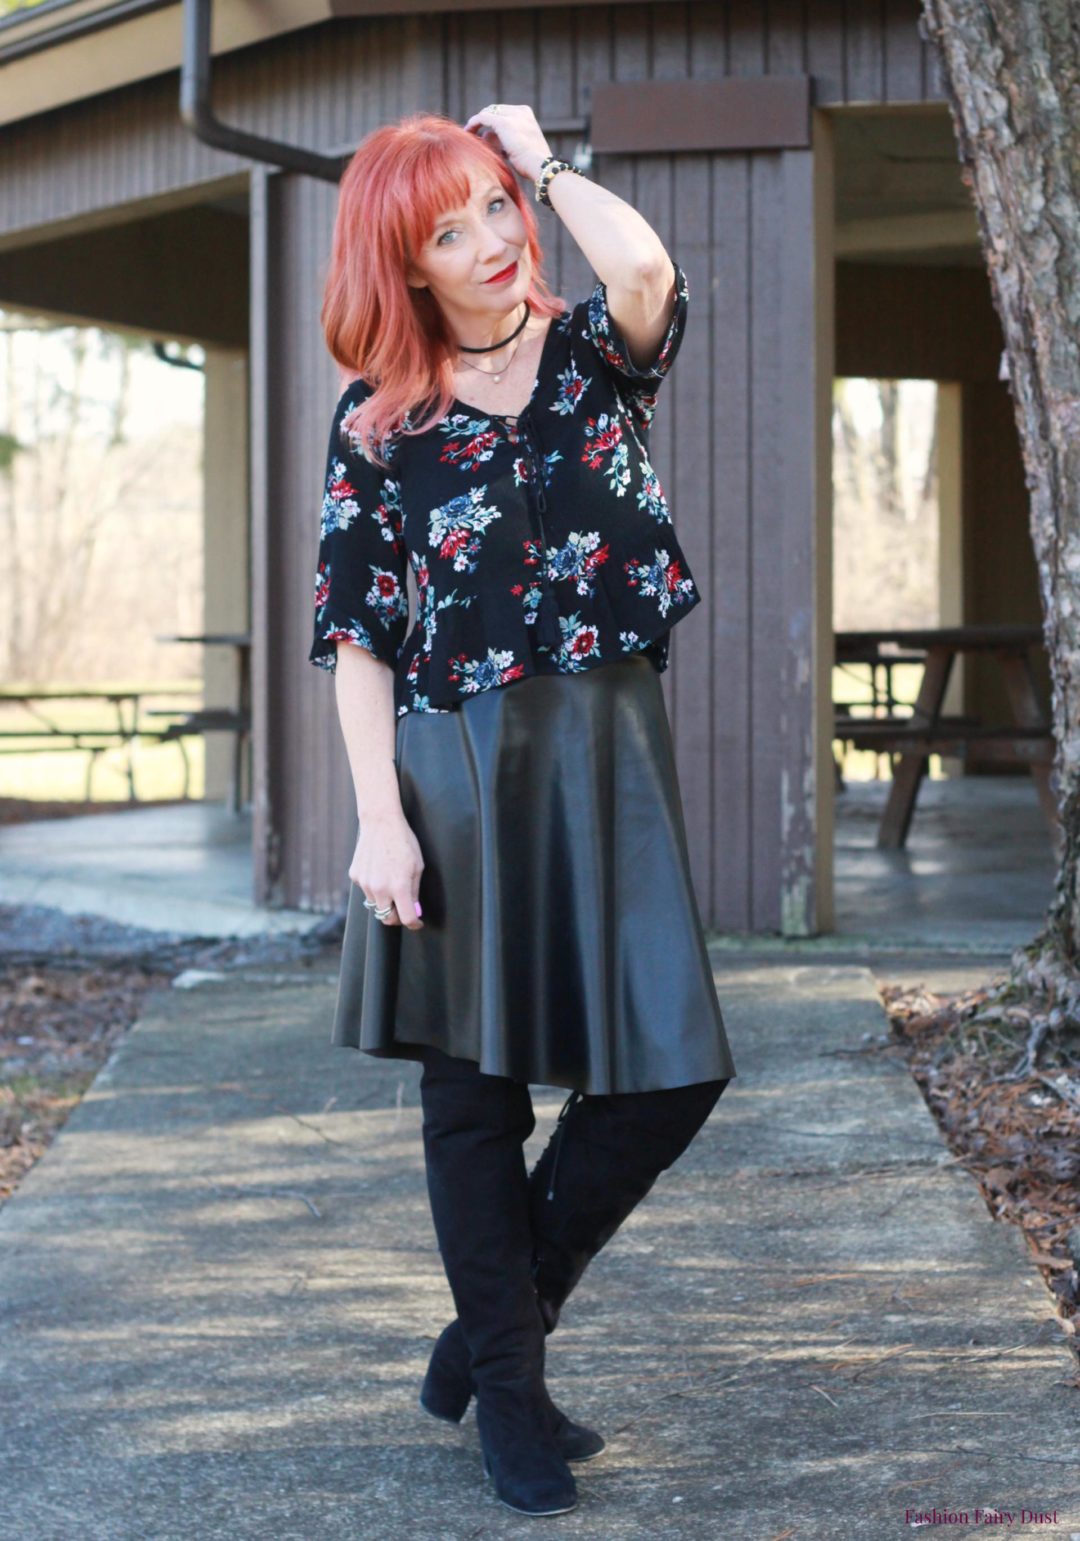 Faux Leather Skirt & Floral Top: The Spring Skirt Series